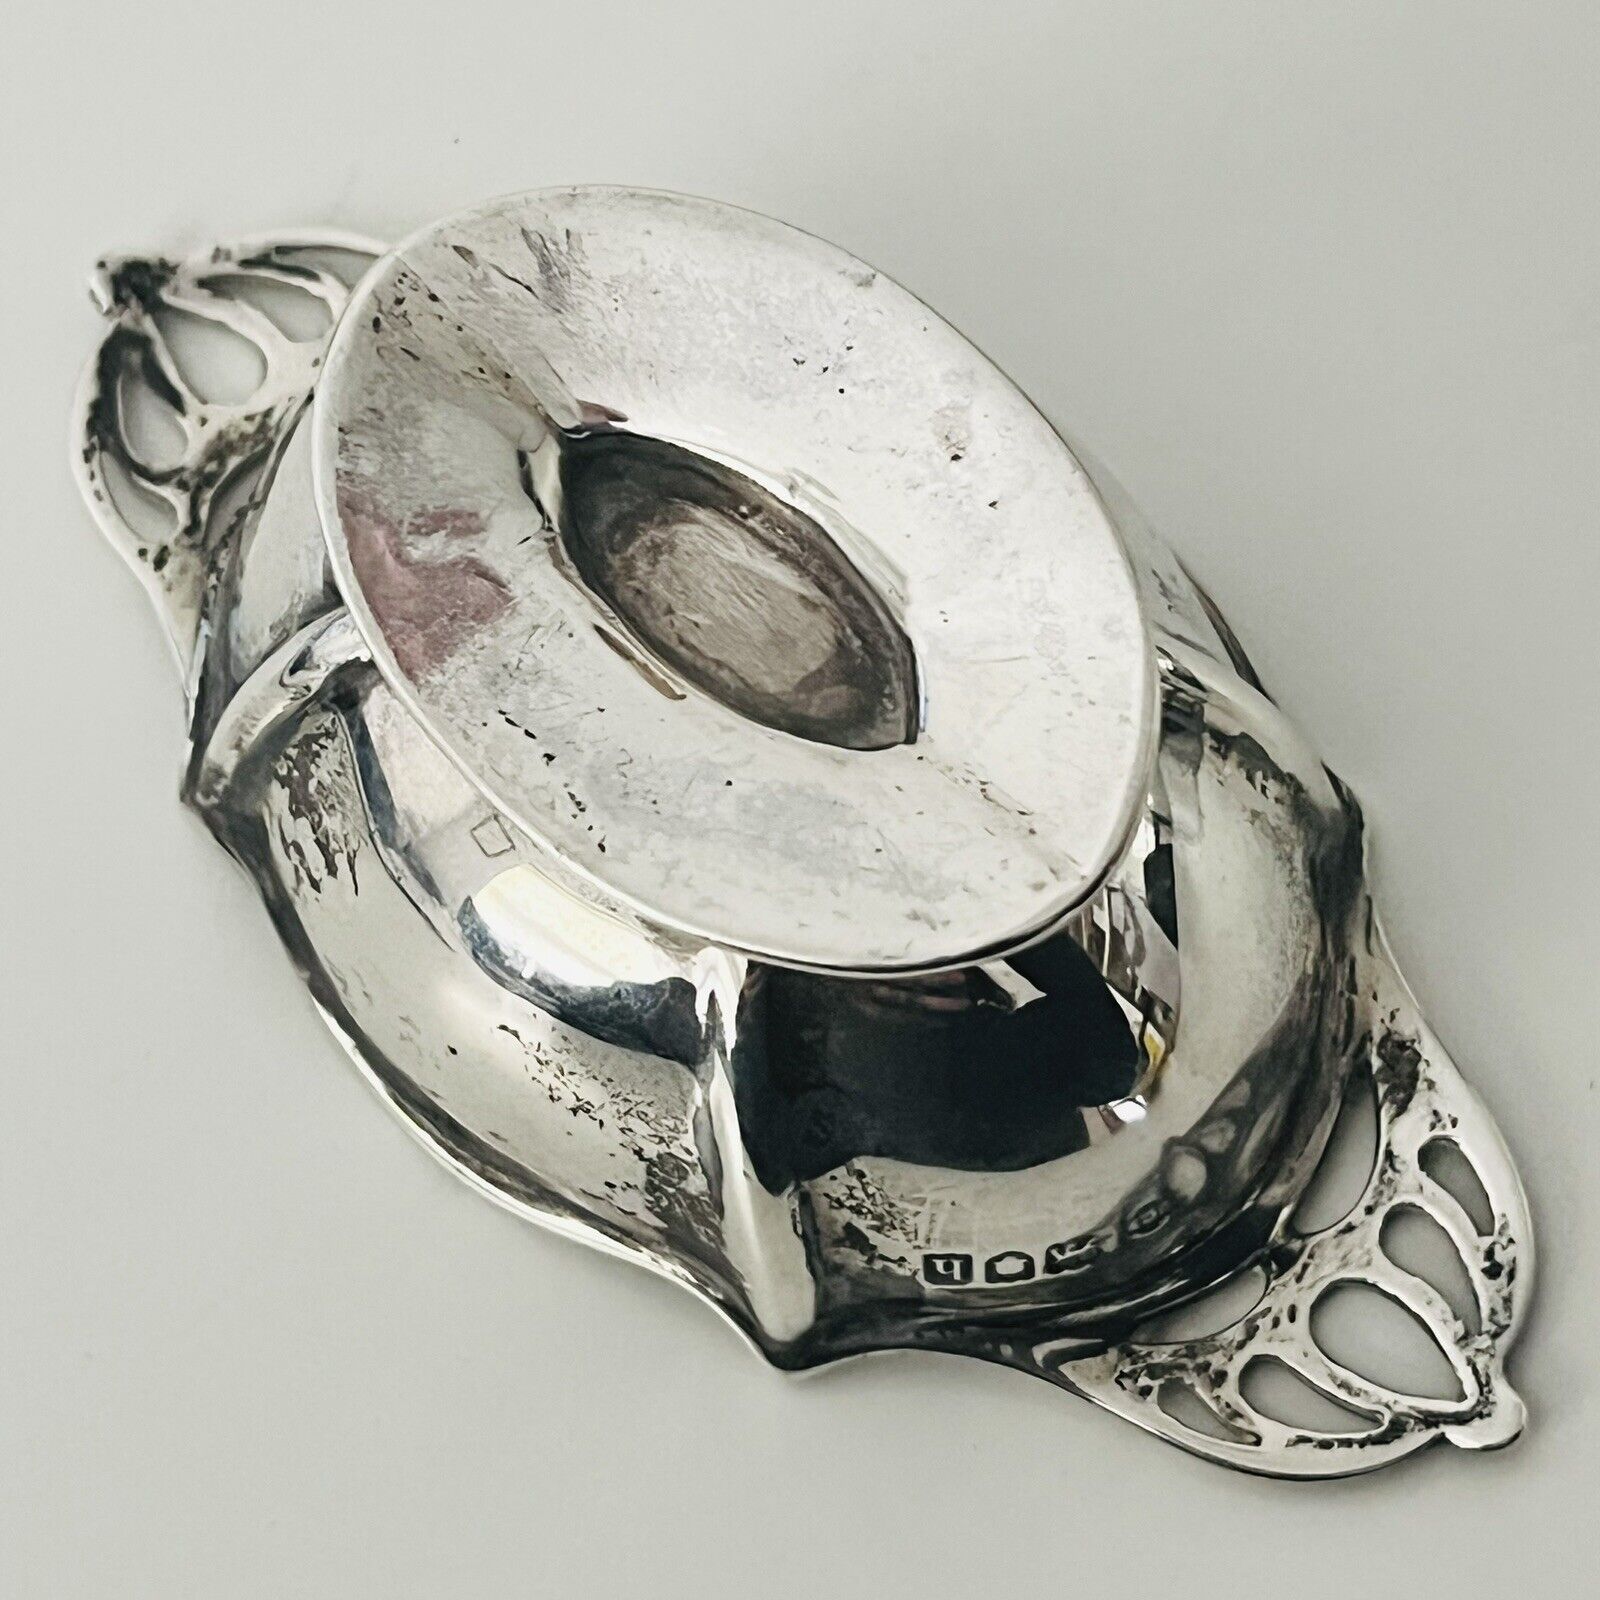 An Antique Edwardian Silver Drinking Cup Quaich, Hallmarked London 1903 - Image 8 of 8